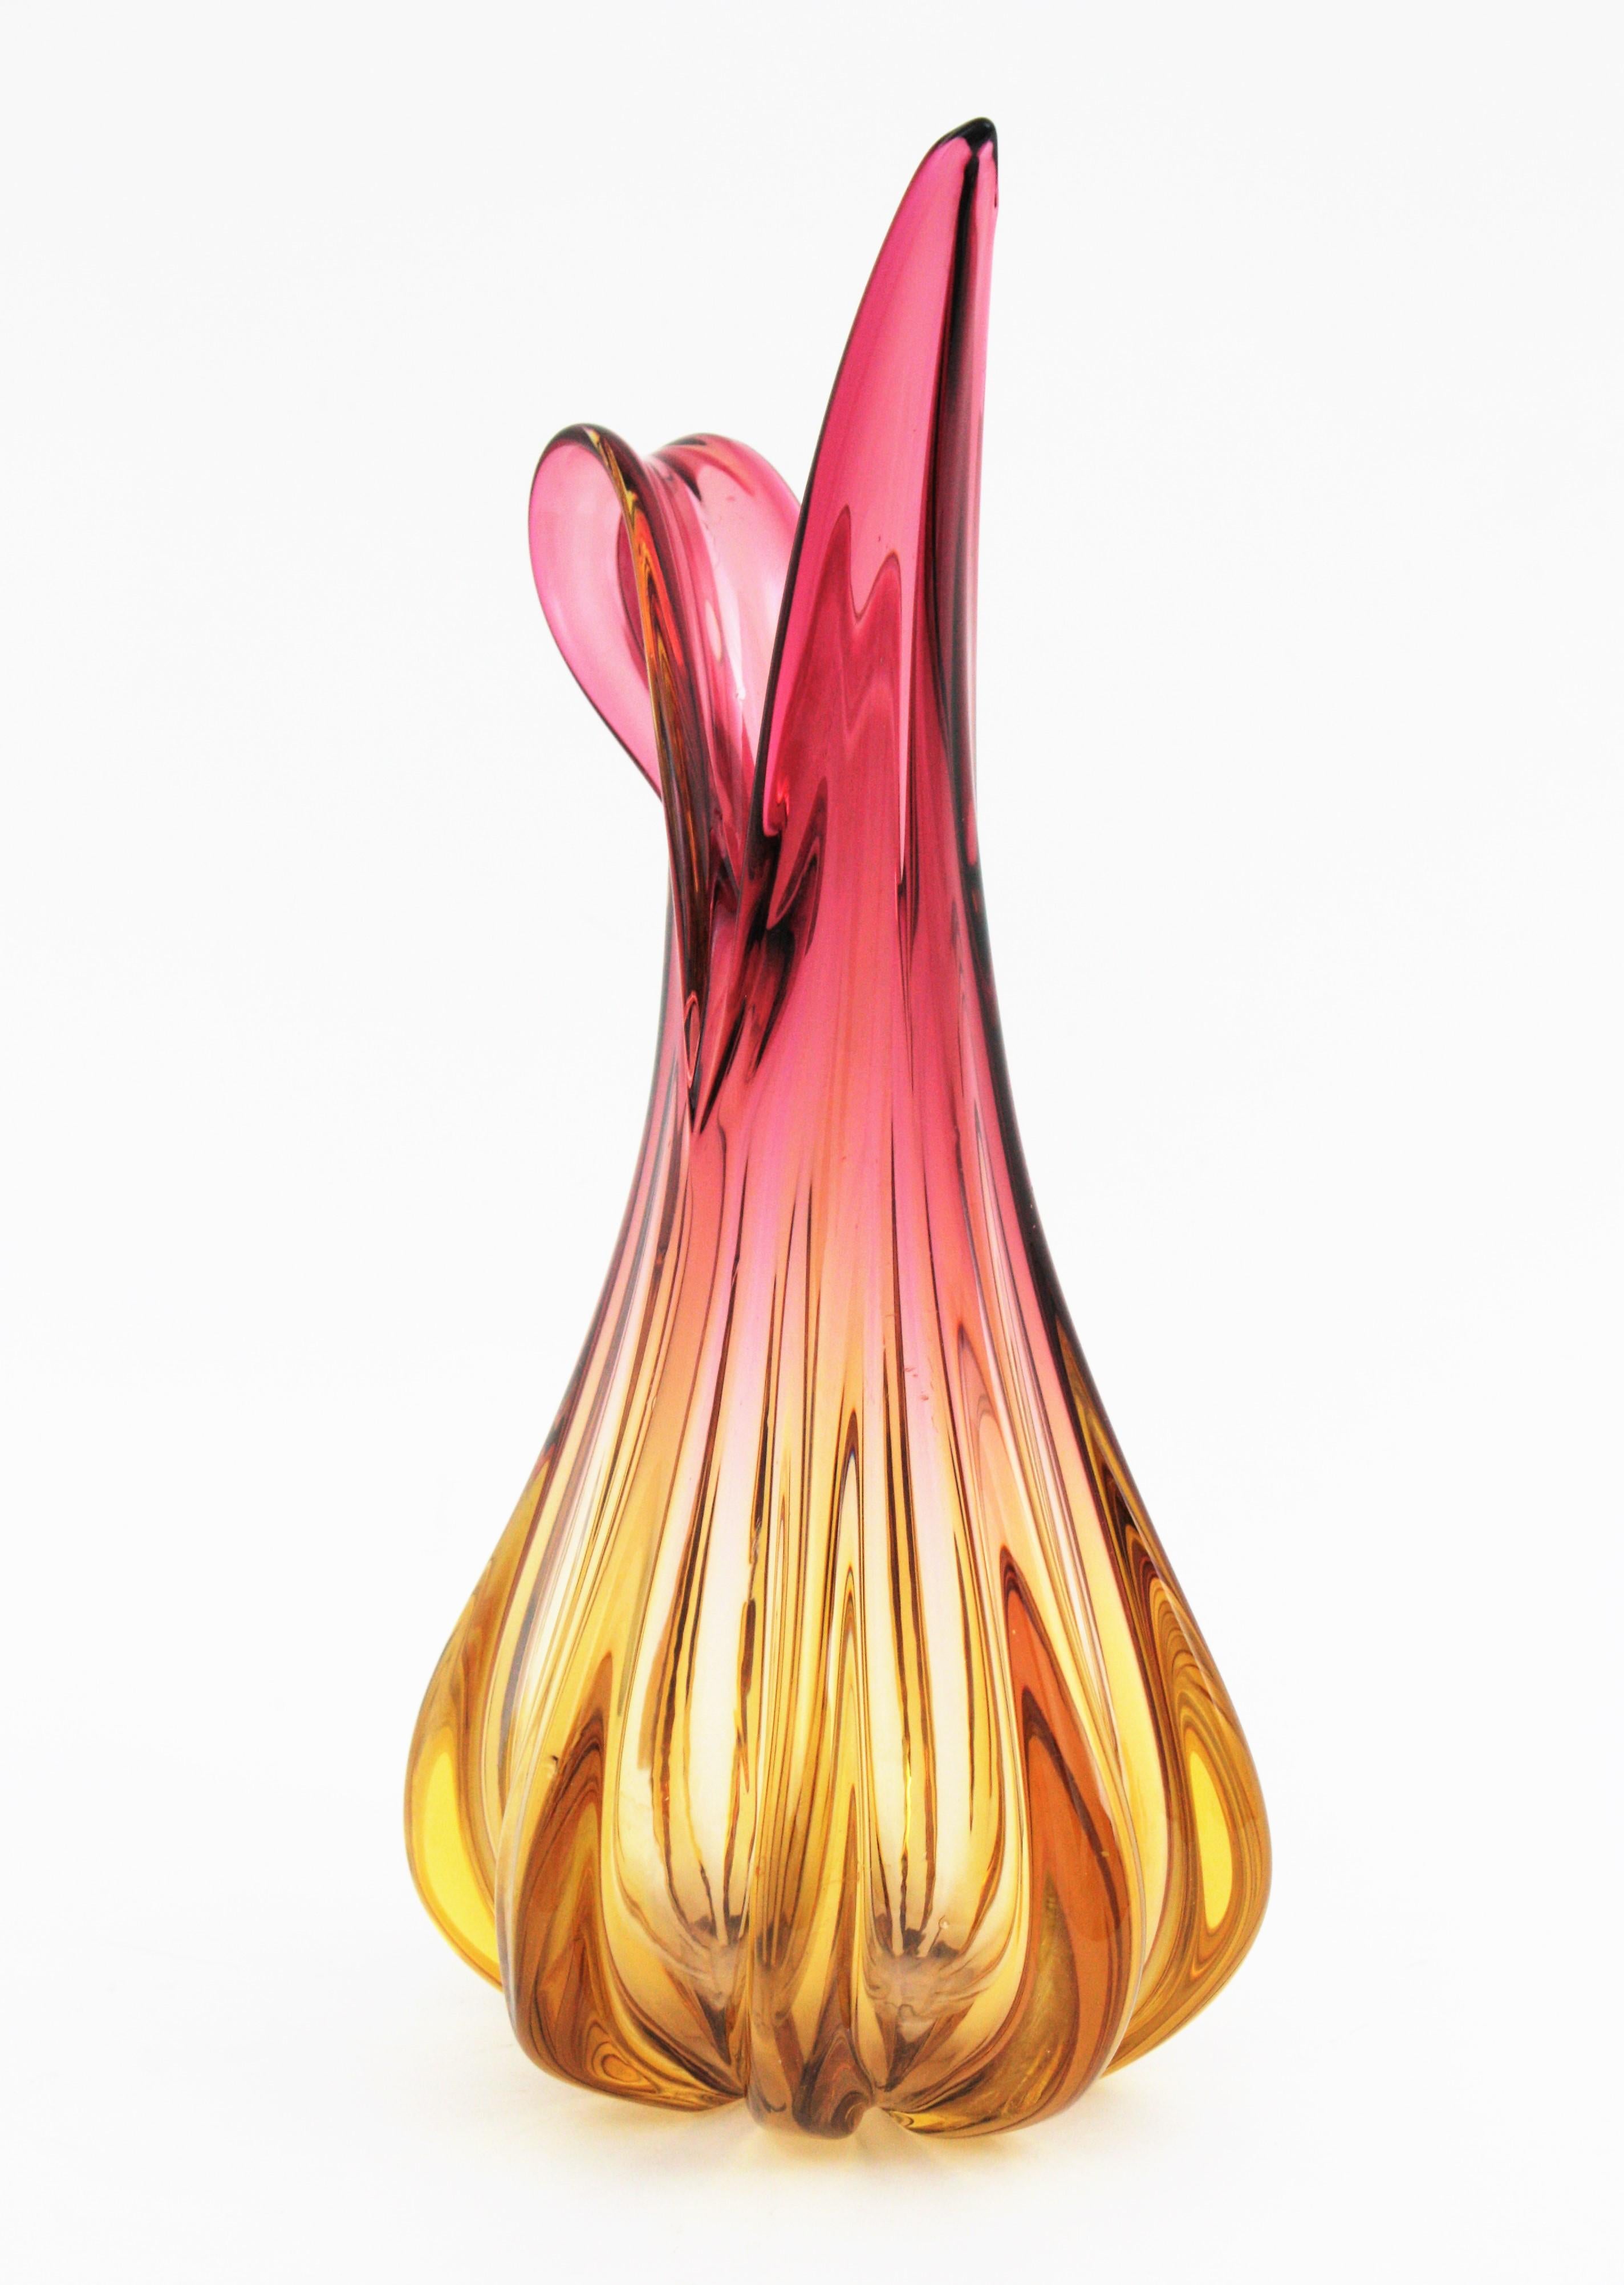 Hand-Crafted Flavio Poli Seguso Murano Pink Amber Sommerso Ribbed Art Glass Vase, 1950s For Sale